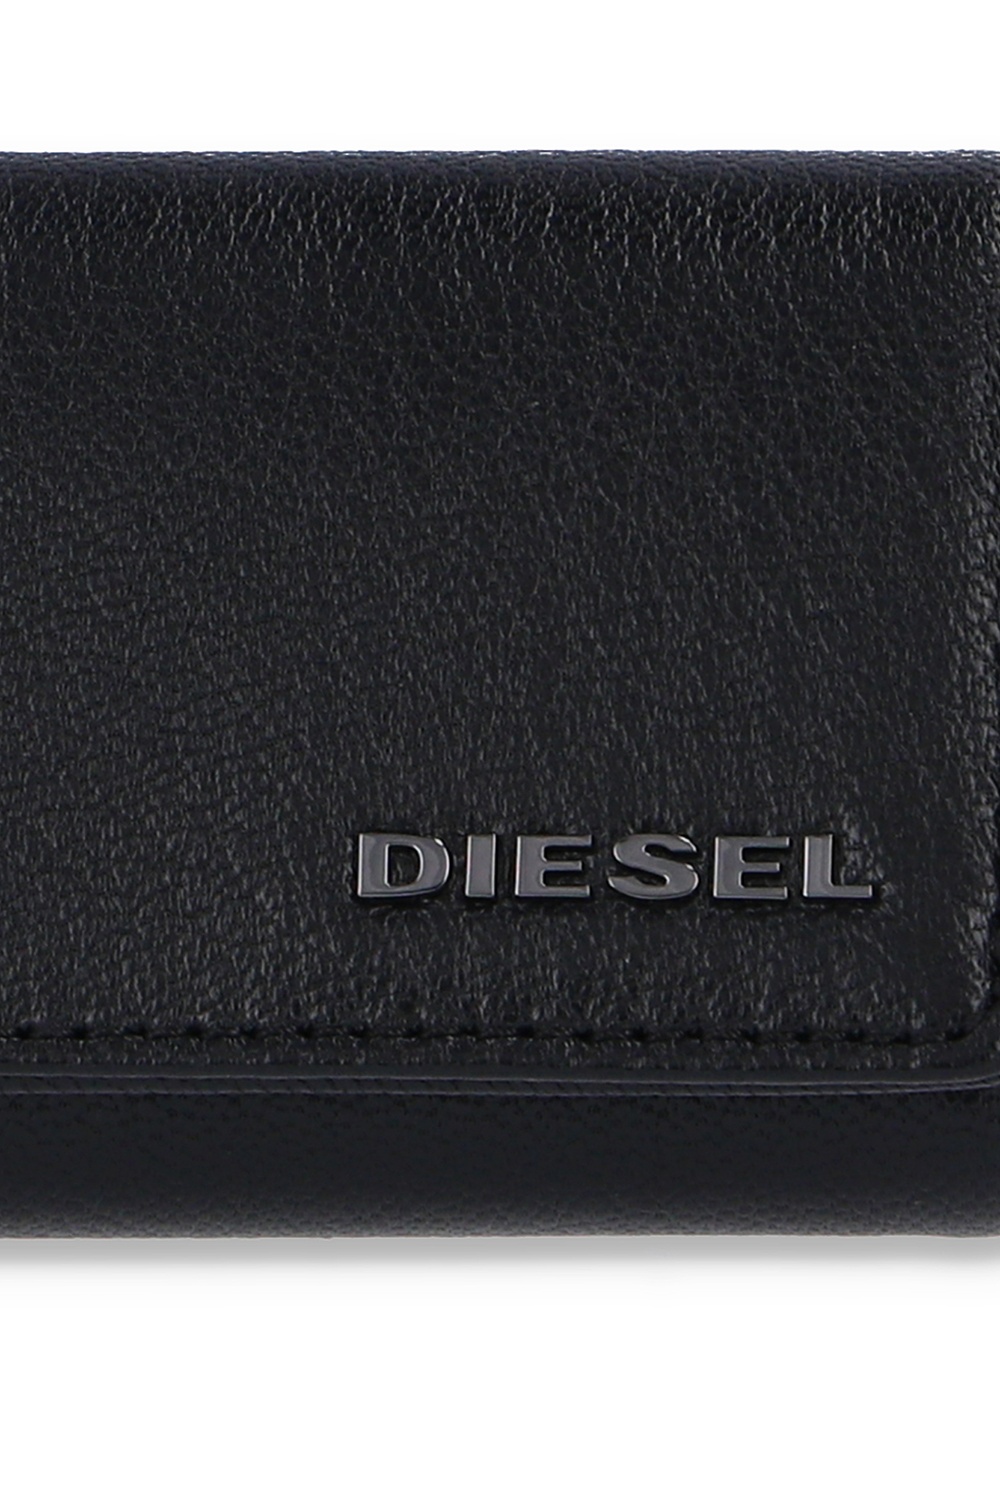 Diesel Recommended for you